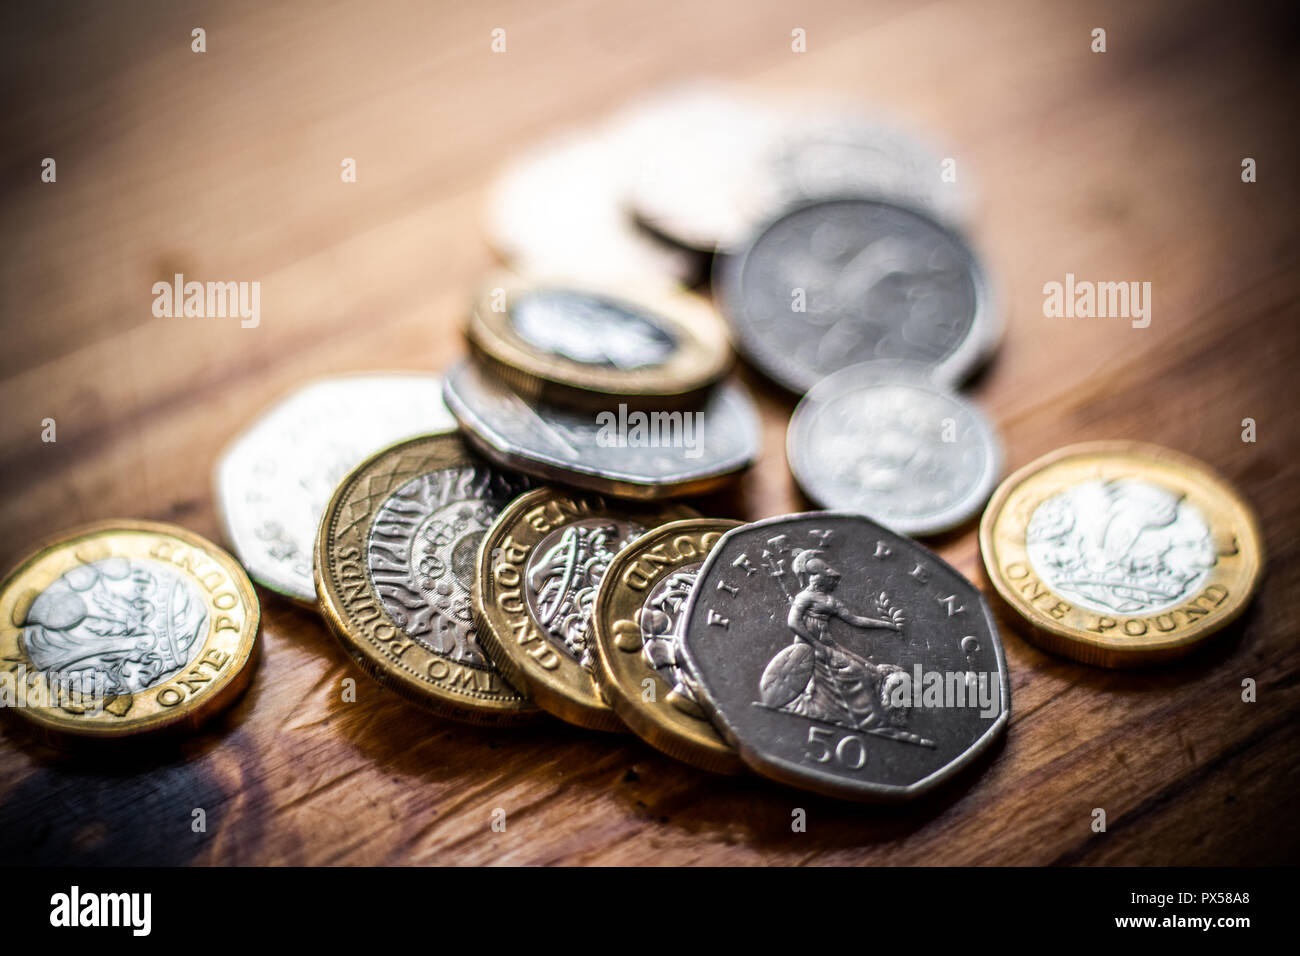 New Great British Pound GBP Coins laying casually on wooden surface. Wealth, Money, Cash, Change. Stock Photo